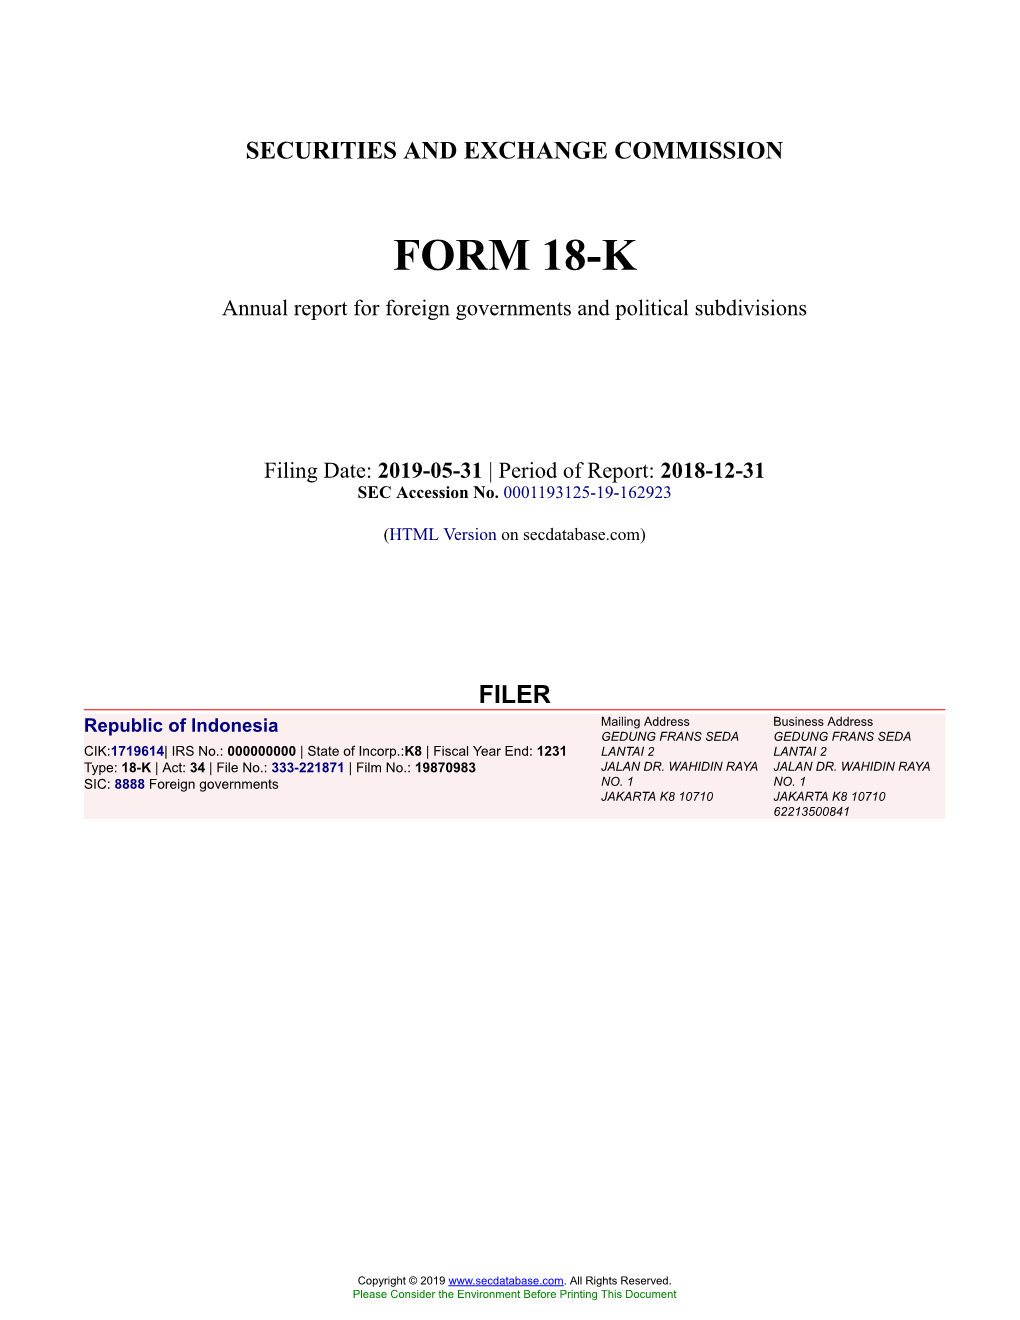 Republic of Indonesia Form 18-K Filed 2019-05-31